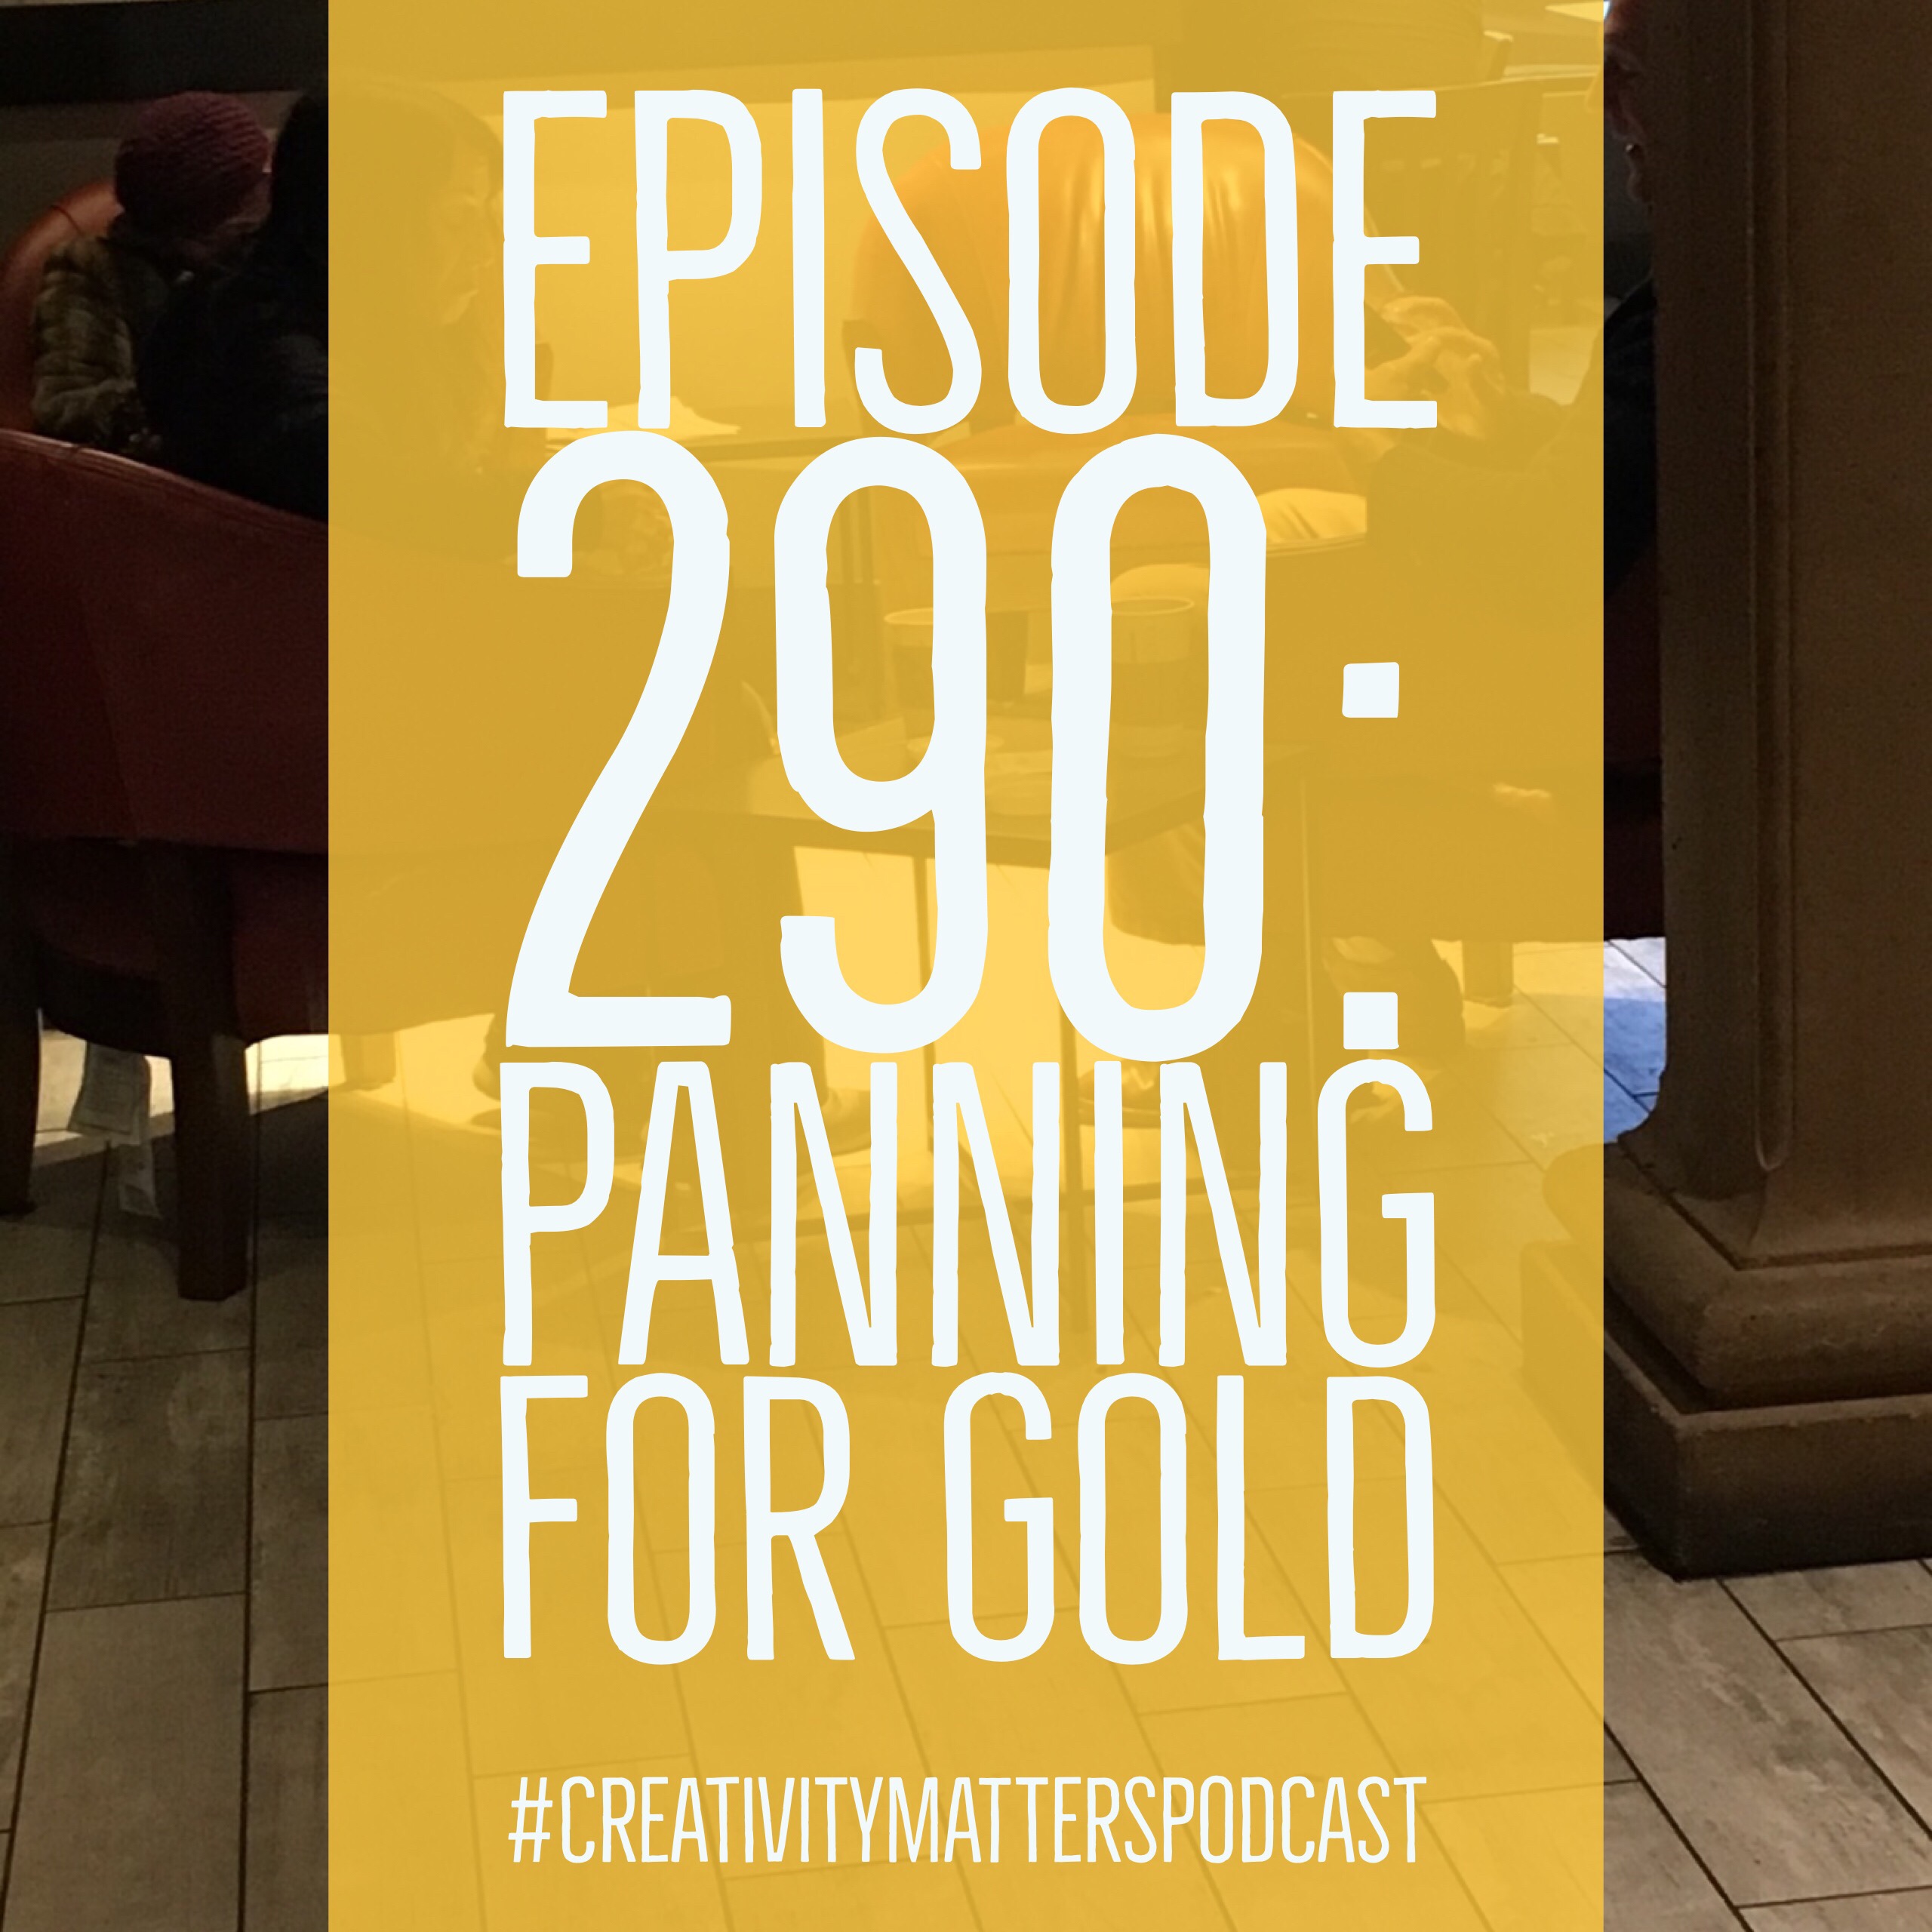 Episode 290: Panning for Gold